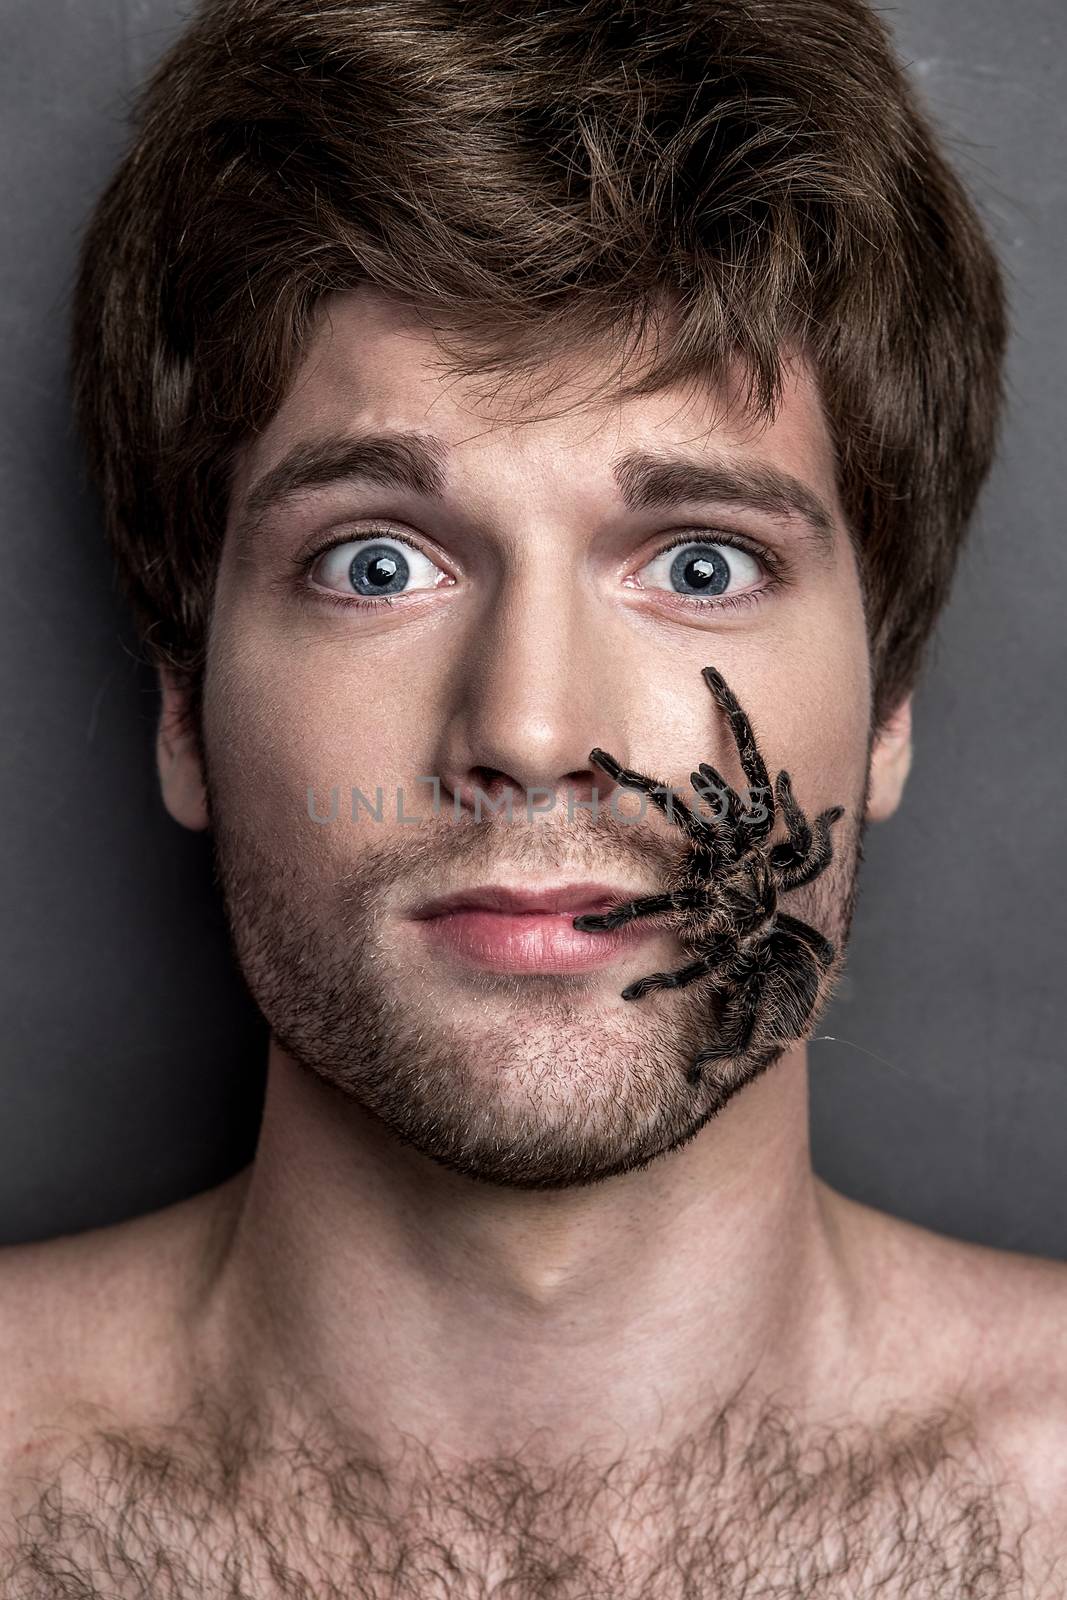 Portrait of a Young Handsome Man with Big Spider on His Face